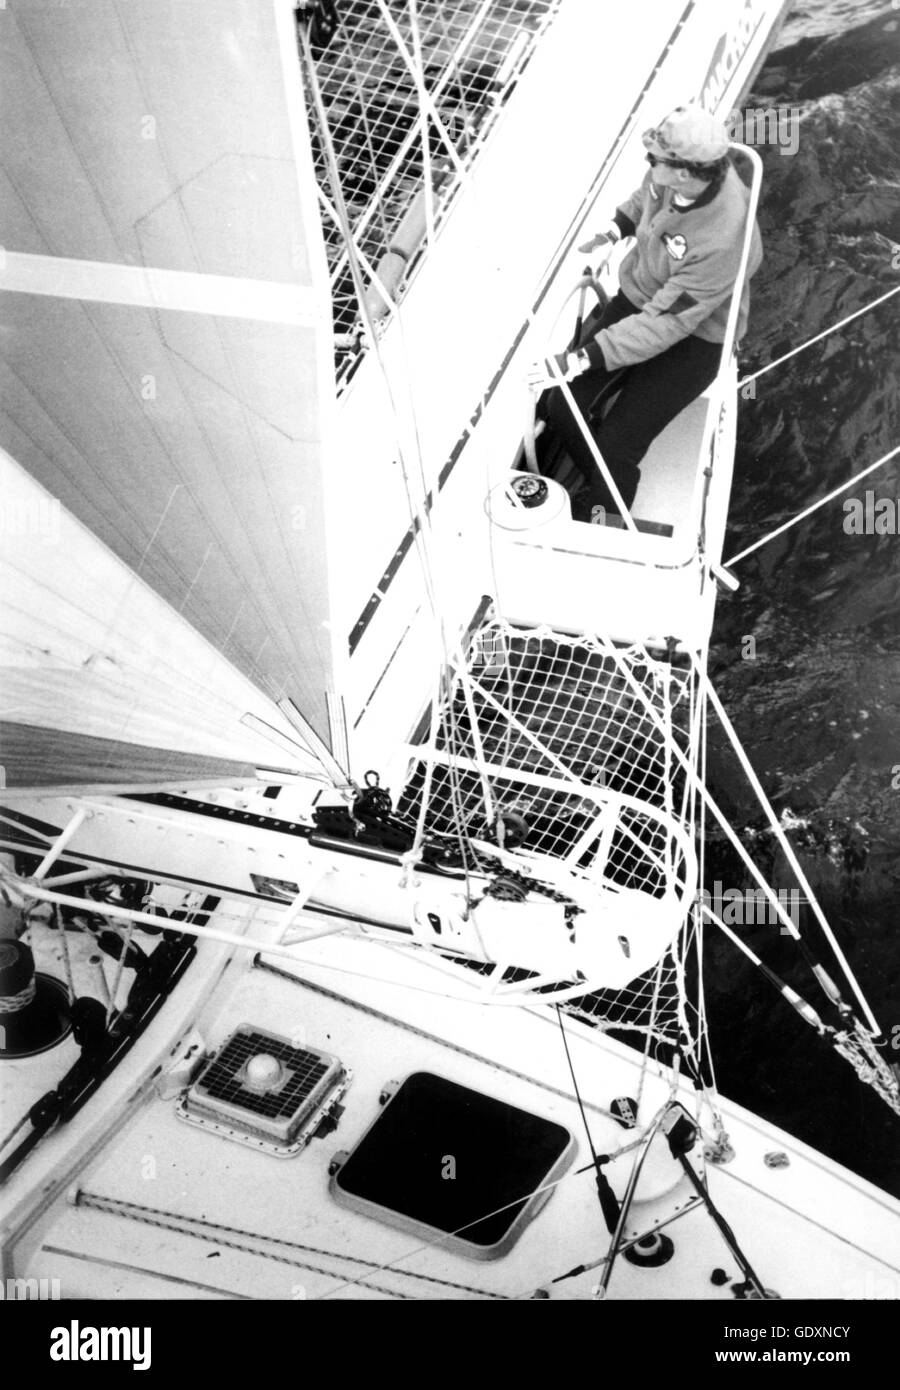 AJAX NEWS PHOTOS. 5TH JUNE, 1988. PLYMOUTH, ENGLAND. - CARLSBERG SINGLE HANDED TRANSAT - COCKPIT VIEW - PHILIPPE POUPON FROM PARIS, PERCHED IN HIS CUSTOM BUILT STEERING COCKPIT ON THE 60FT TRIMARAN FLEURY MICHON AT THE START OF THIS YEAR'S RACE. PHOTO:JONATHAN EASTLAND/AJAX REF:HDD/YA/FLEURY MICHON/TRANSAT 1988 Stock Photo